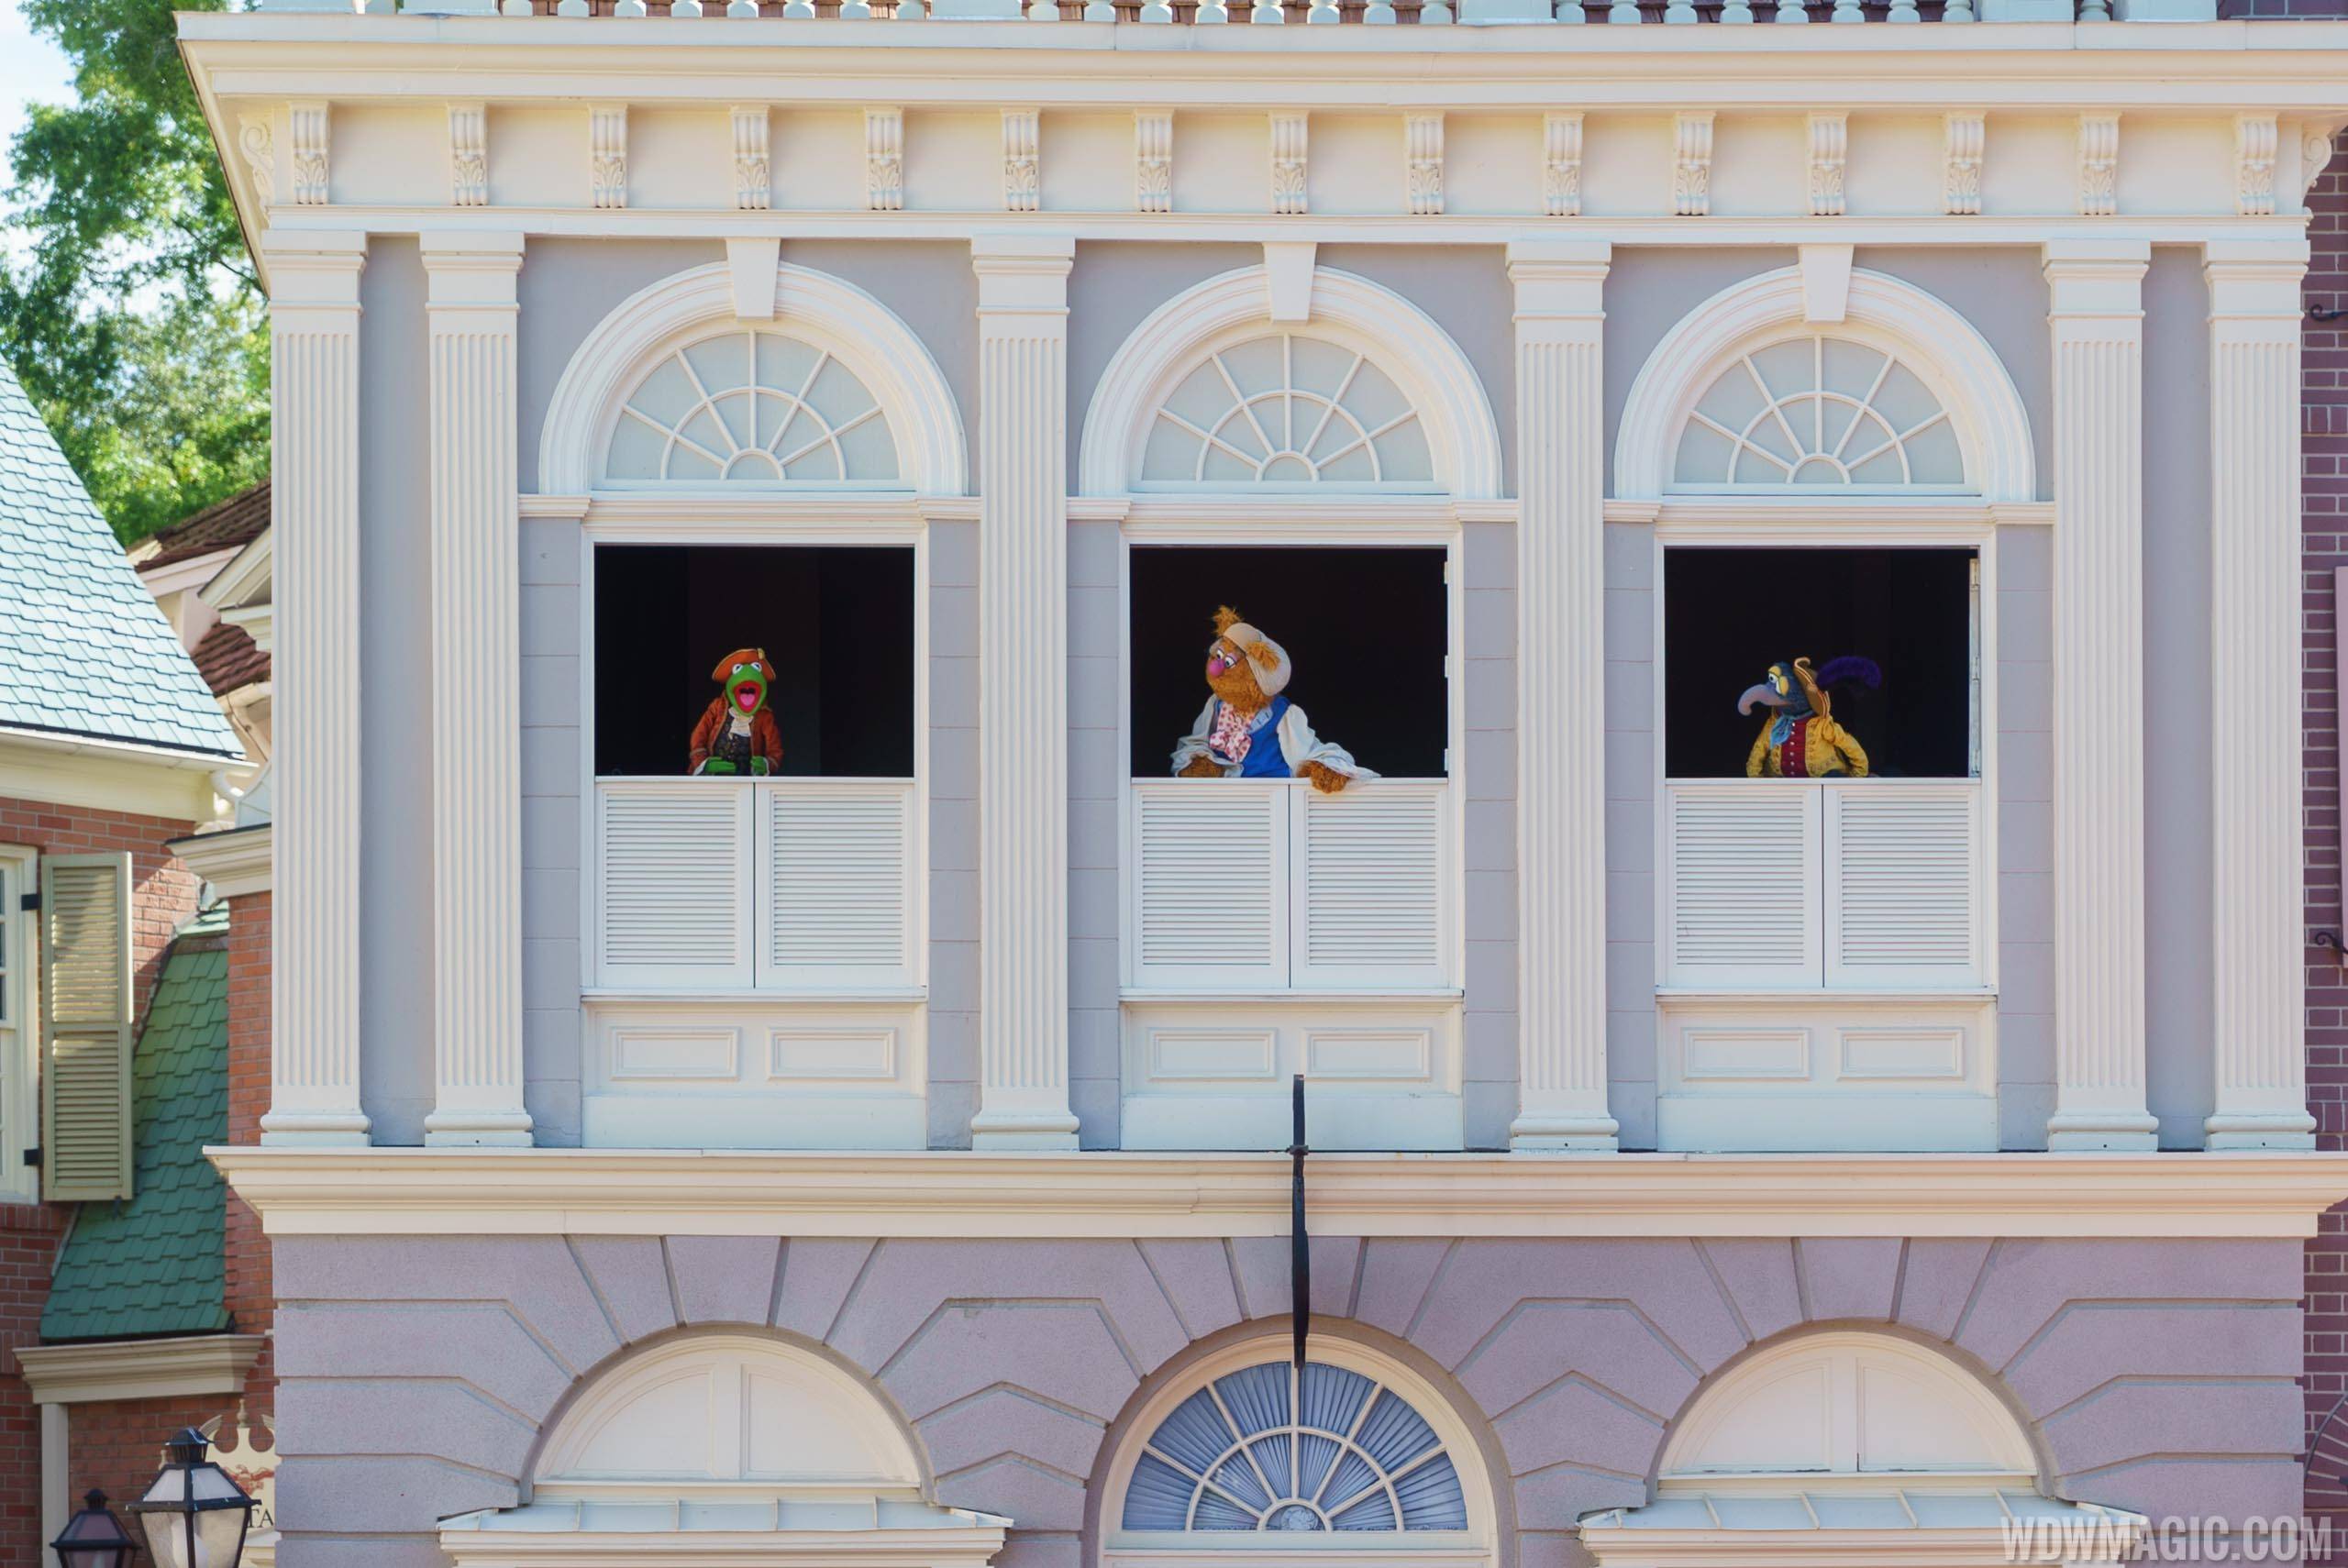 'The Muppets Present Great Moments in American History' show